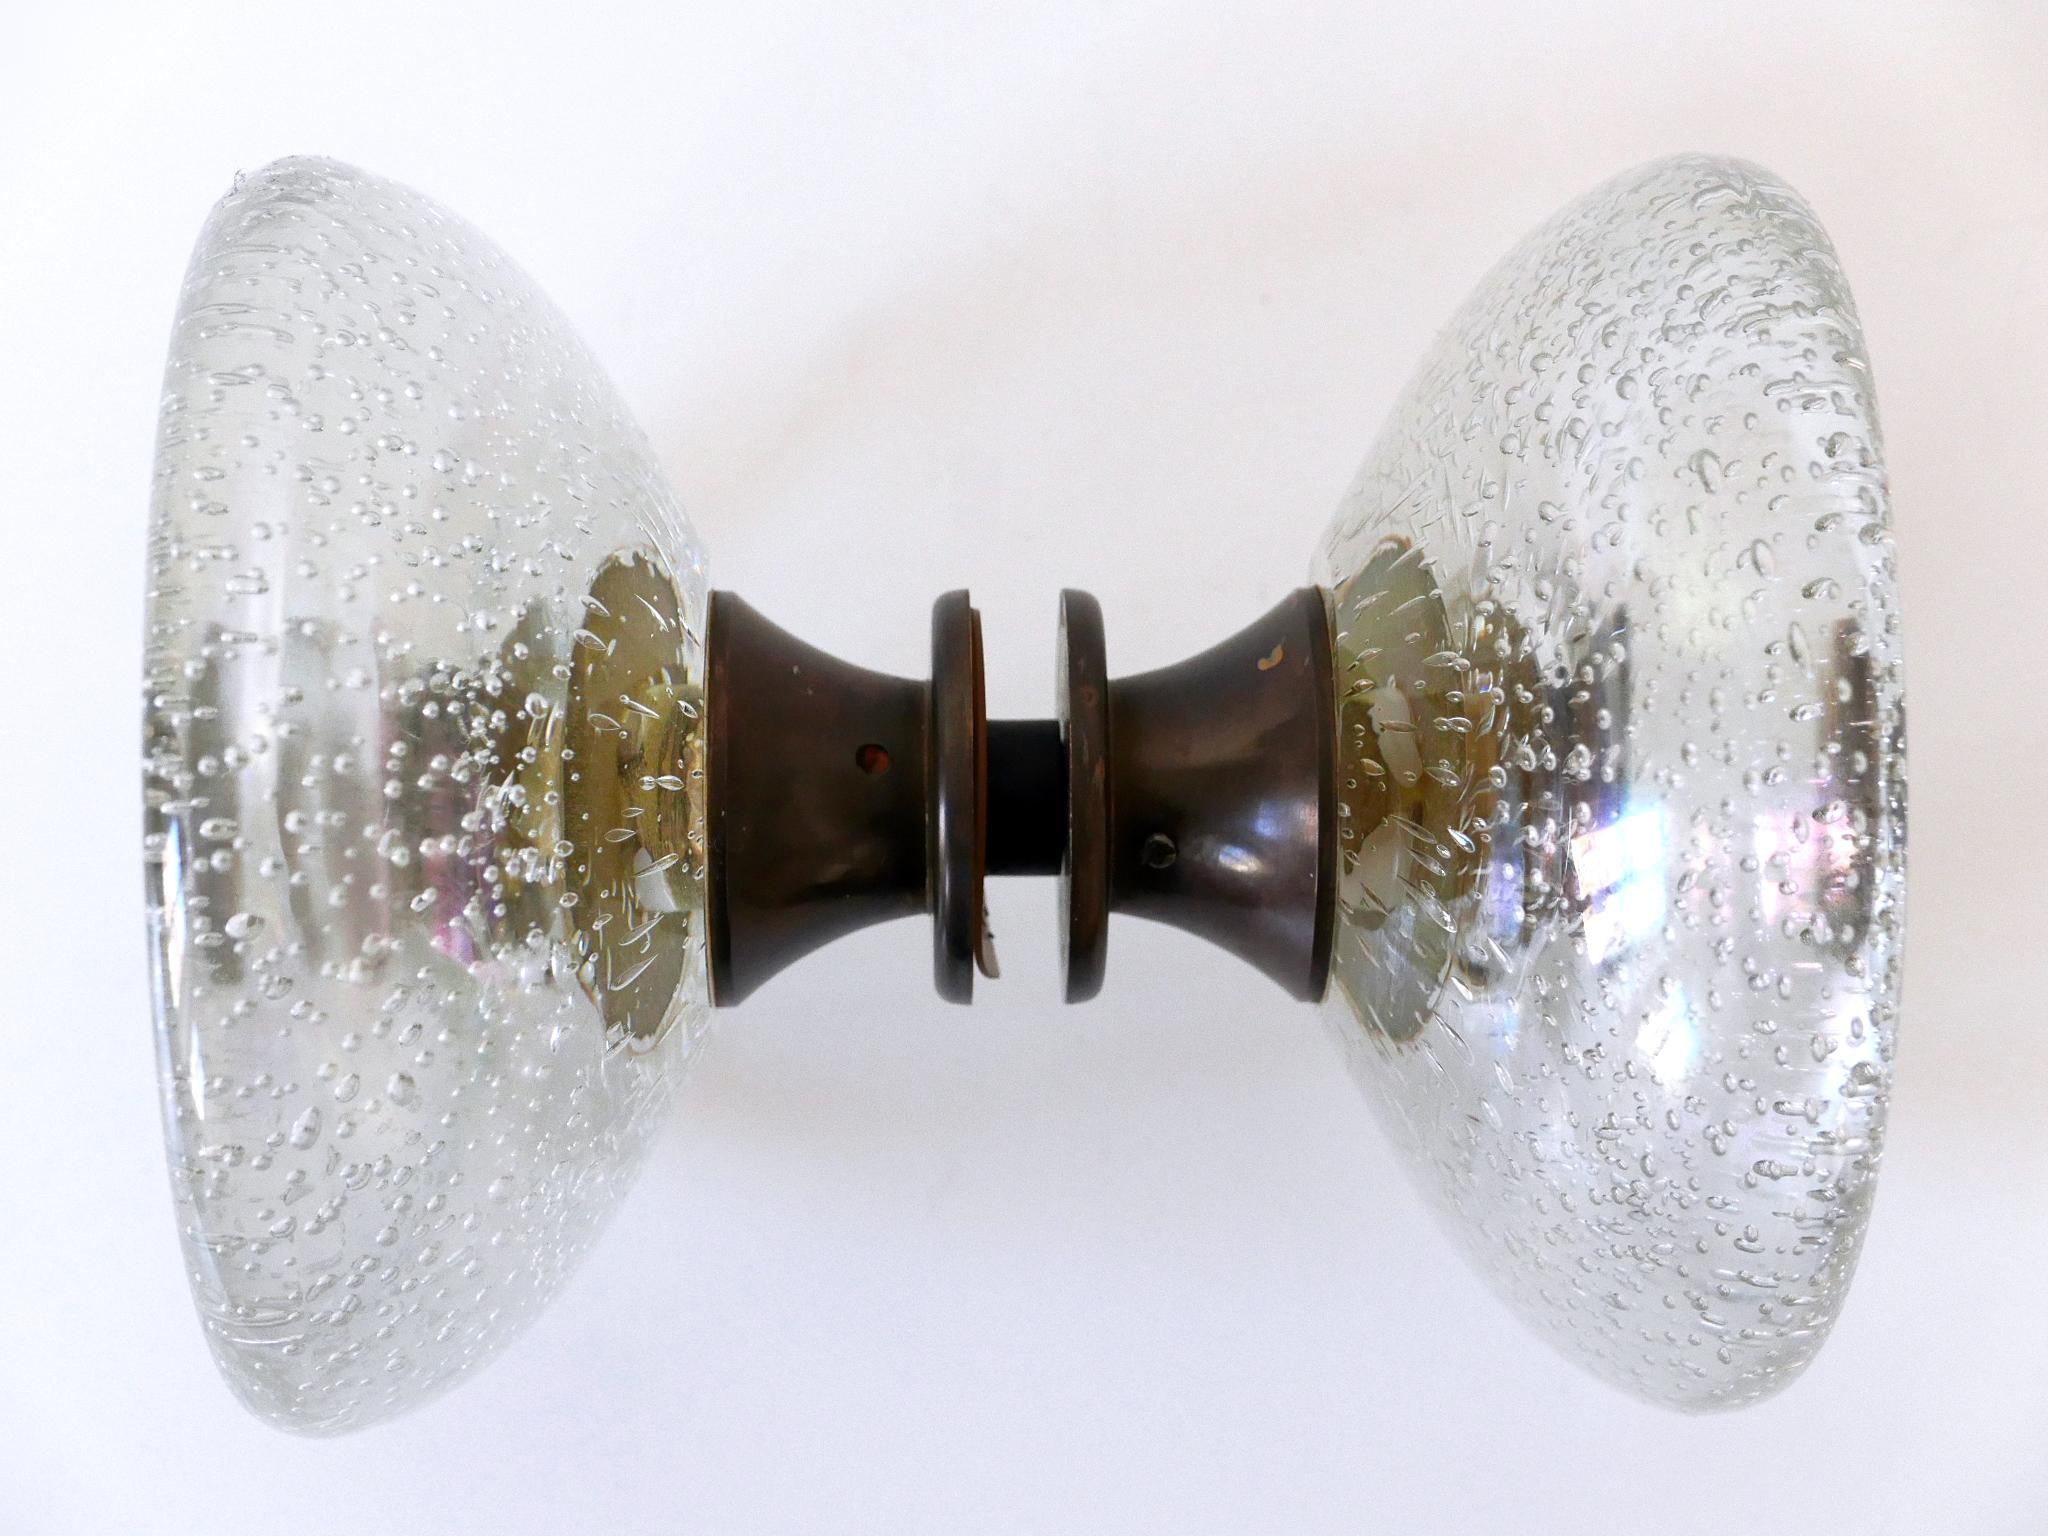 Extremely rare and elegant Mid-Century Modern double push & pull door handle in clear Murano glass with air bubbles.

Two identical door handles available!

Executed in Murano glass and brass.

Dimensions:
Diameter 5.91 in. (15 cm)
Depth of